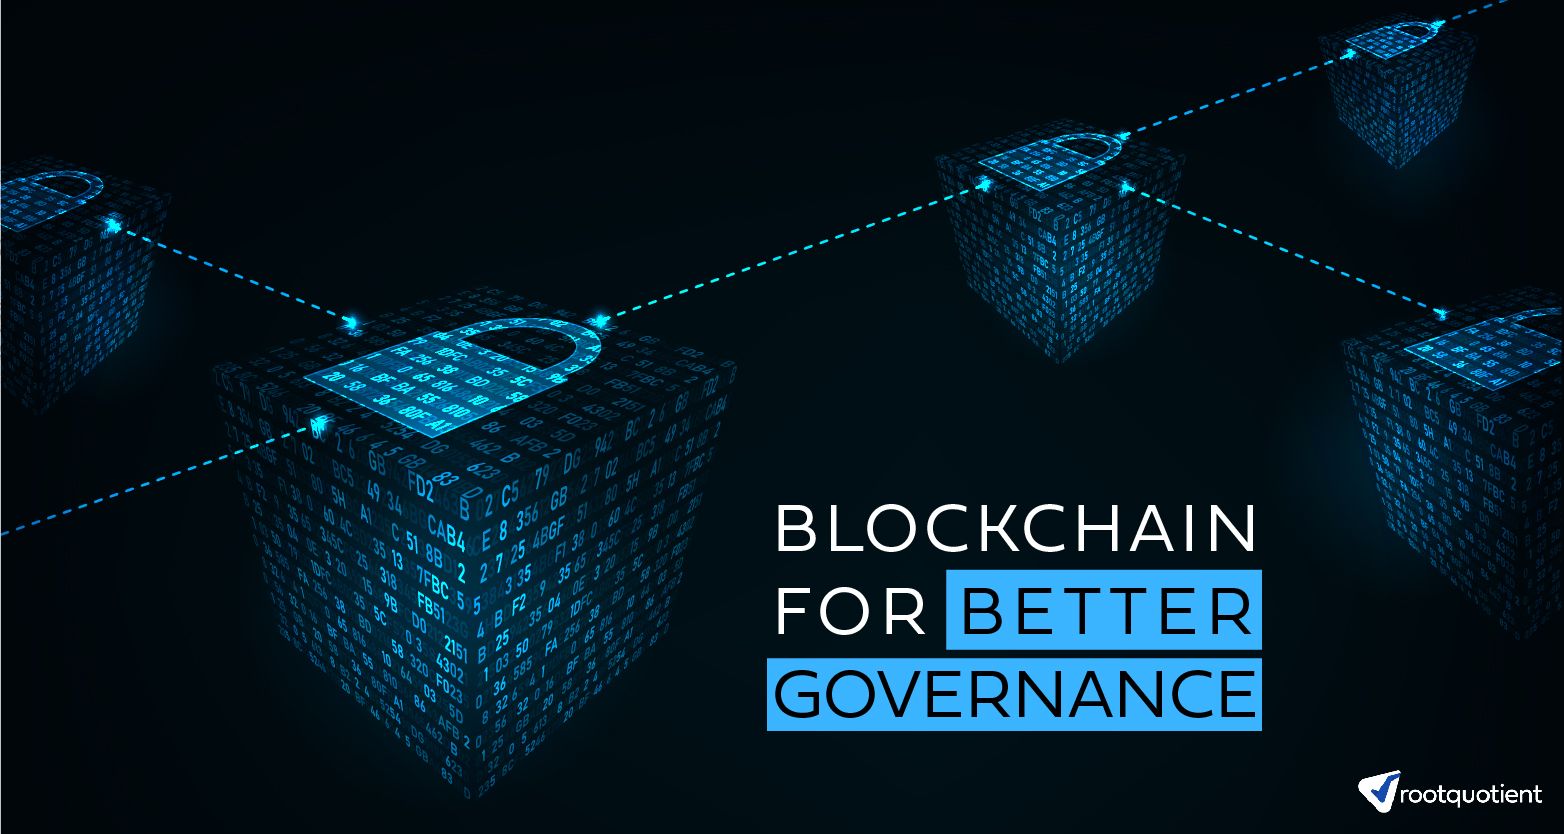 Blockchain Technology In Governance - A Quick Brief